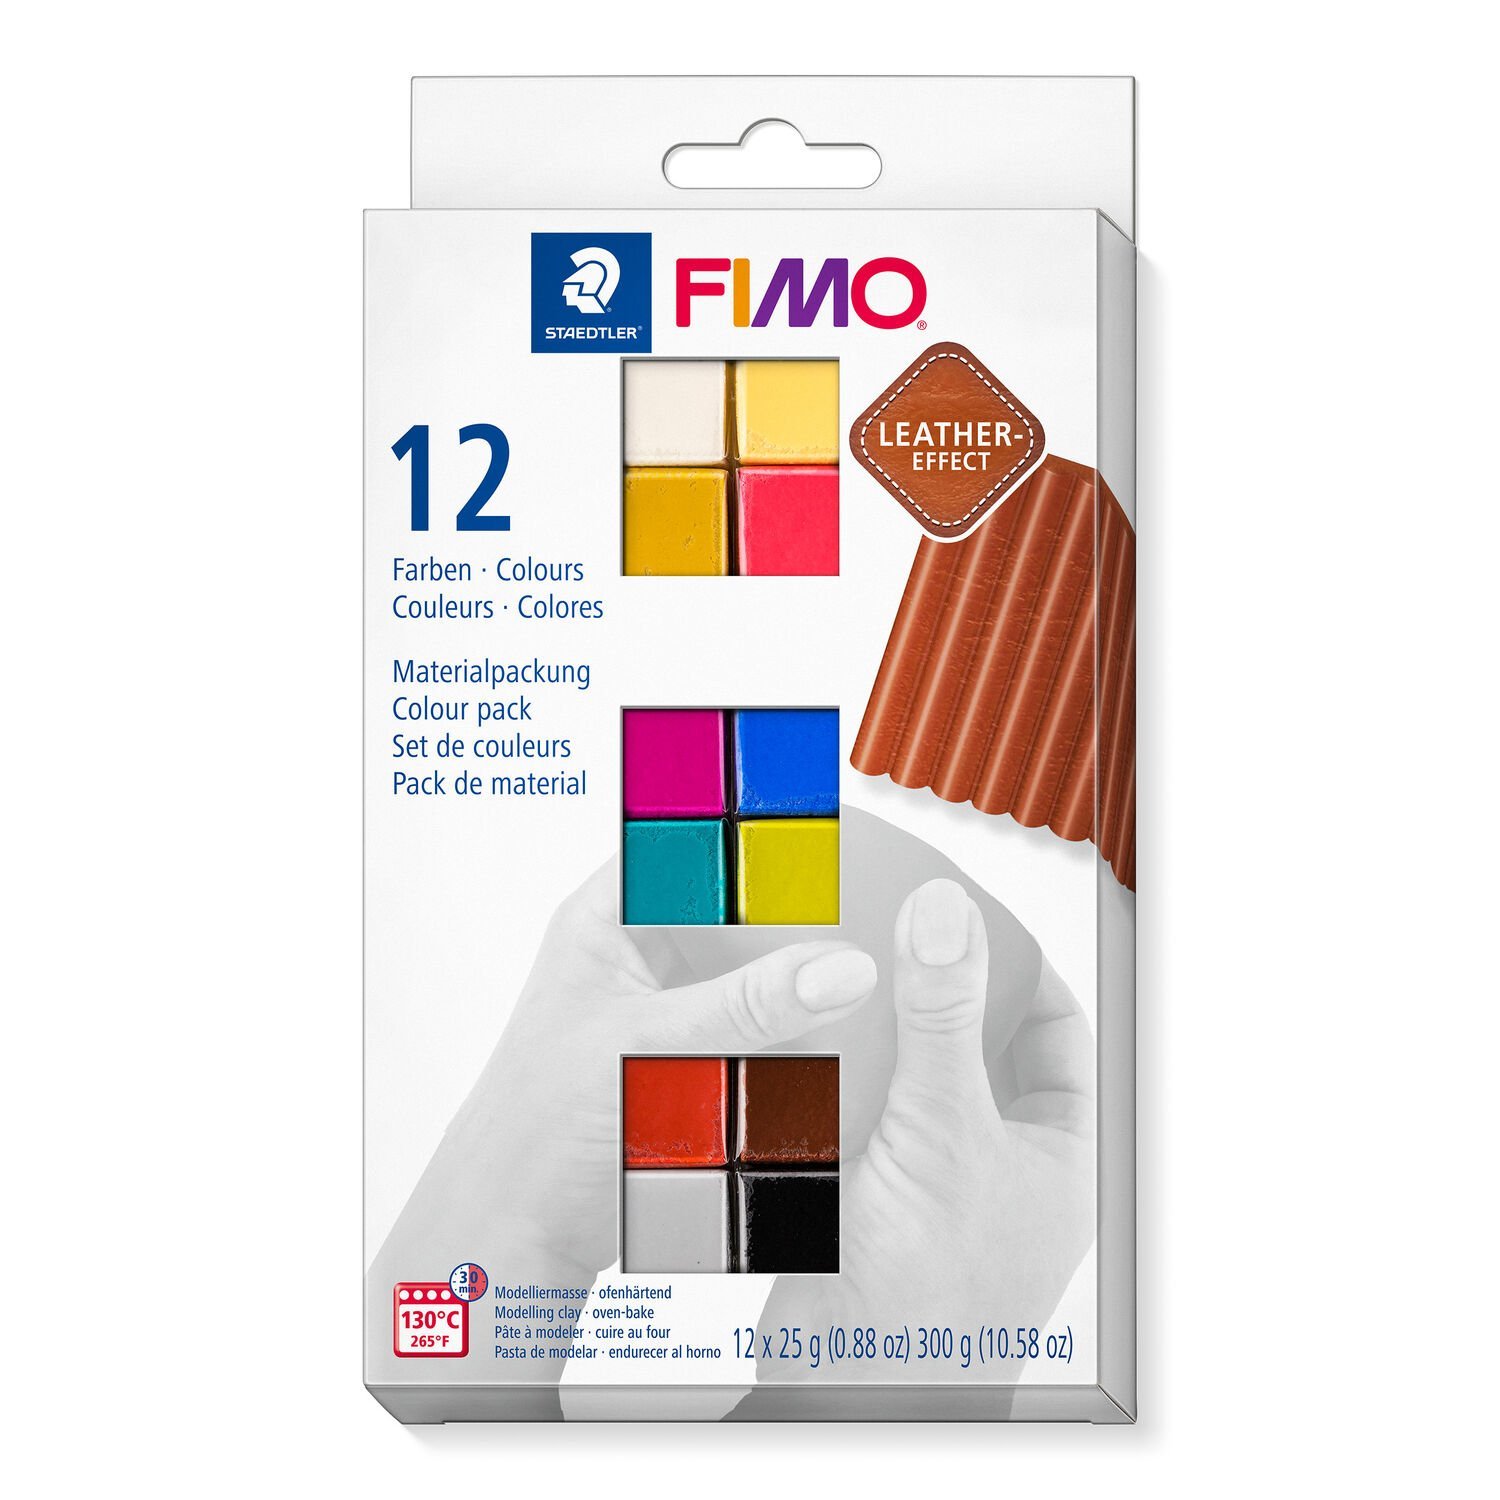 FIMO® leather effect colour pack 8013 C - Oven-bake modelling clay